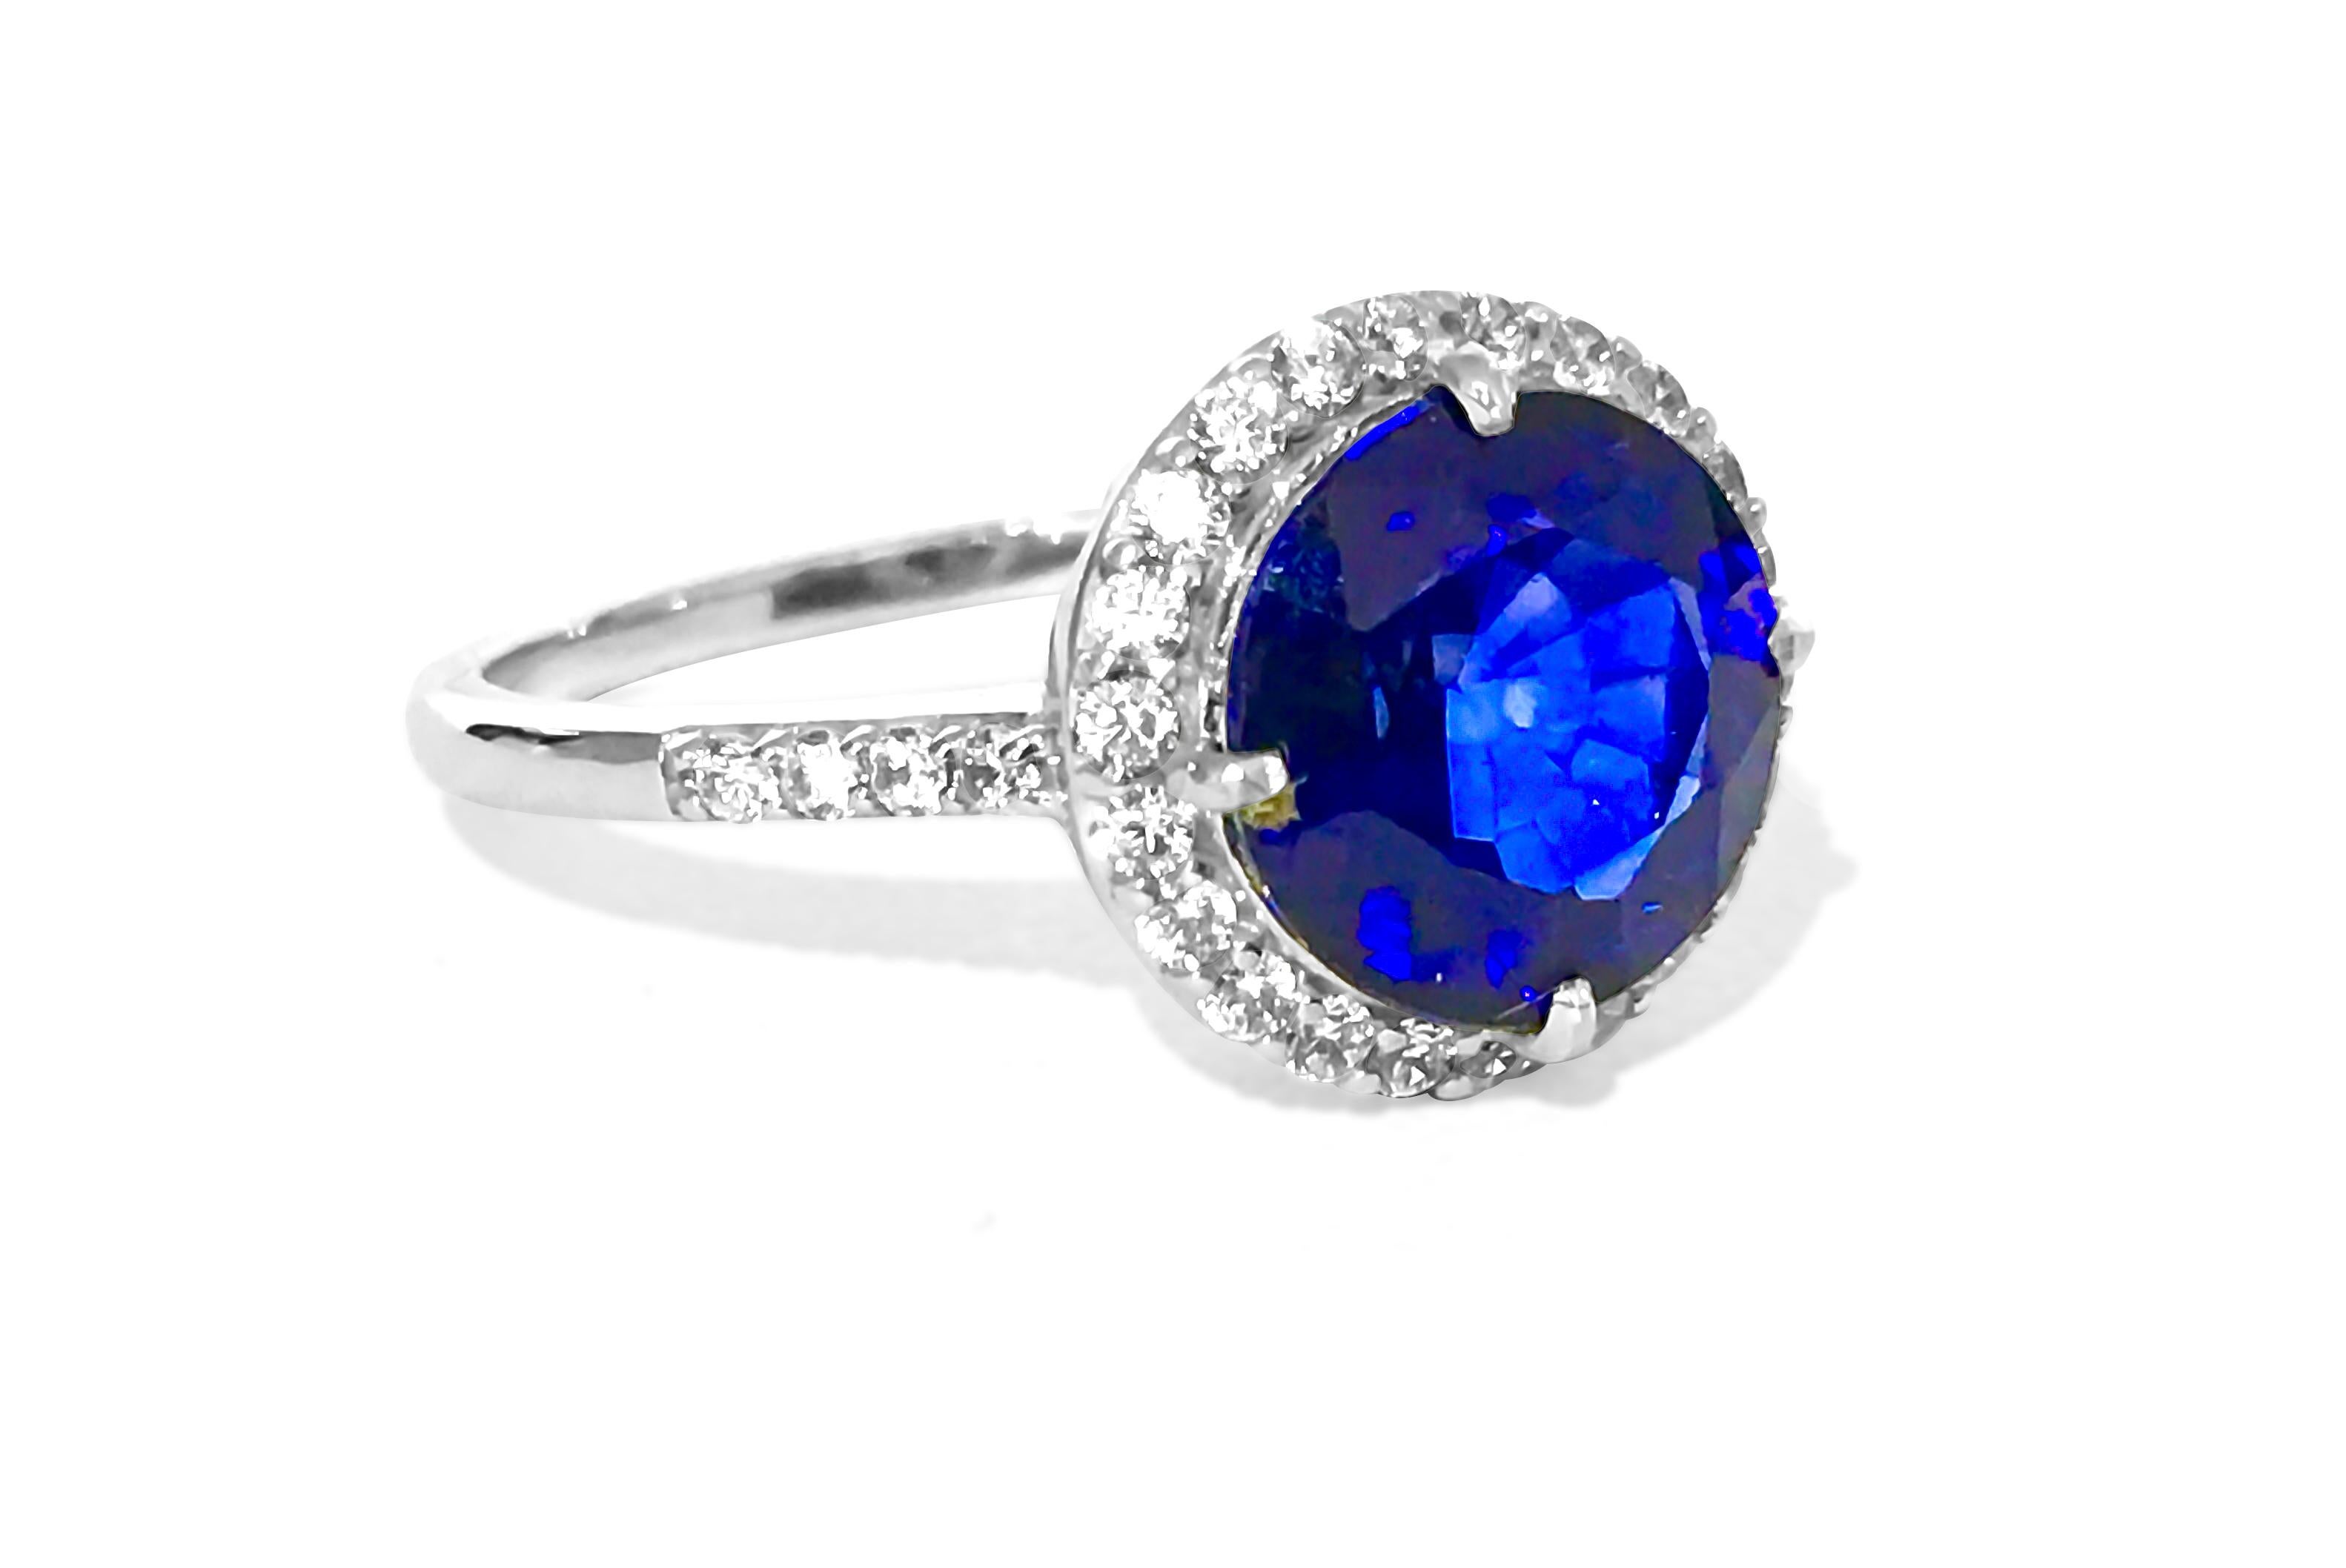 Solid 10k white gold. 
5.50 carat blue sapphire, round cut. 100% natural earth mined blue sapphire. 
0.60 carat diamonds. VS-SI clarity and G color. Round brilliant cut diamonds. 100% natural earth mined diamonds.
Total carat weight: 6.10 carats
All